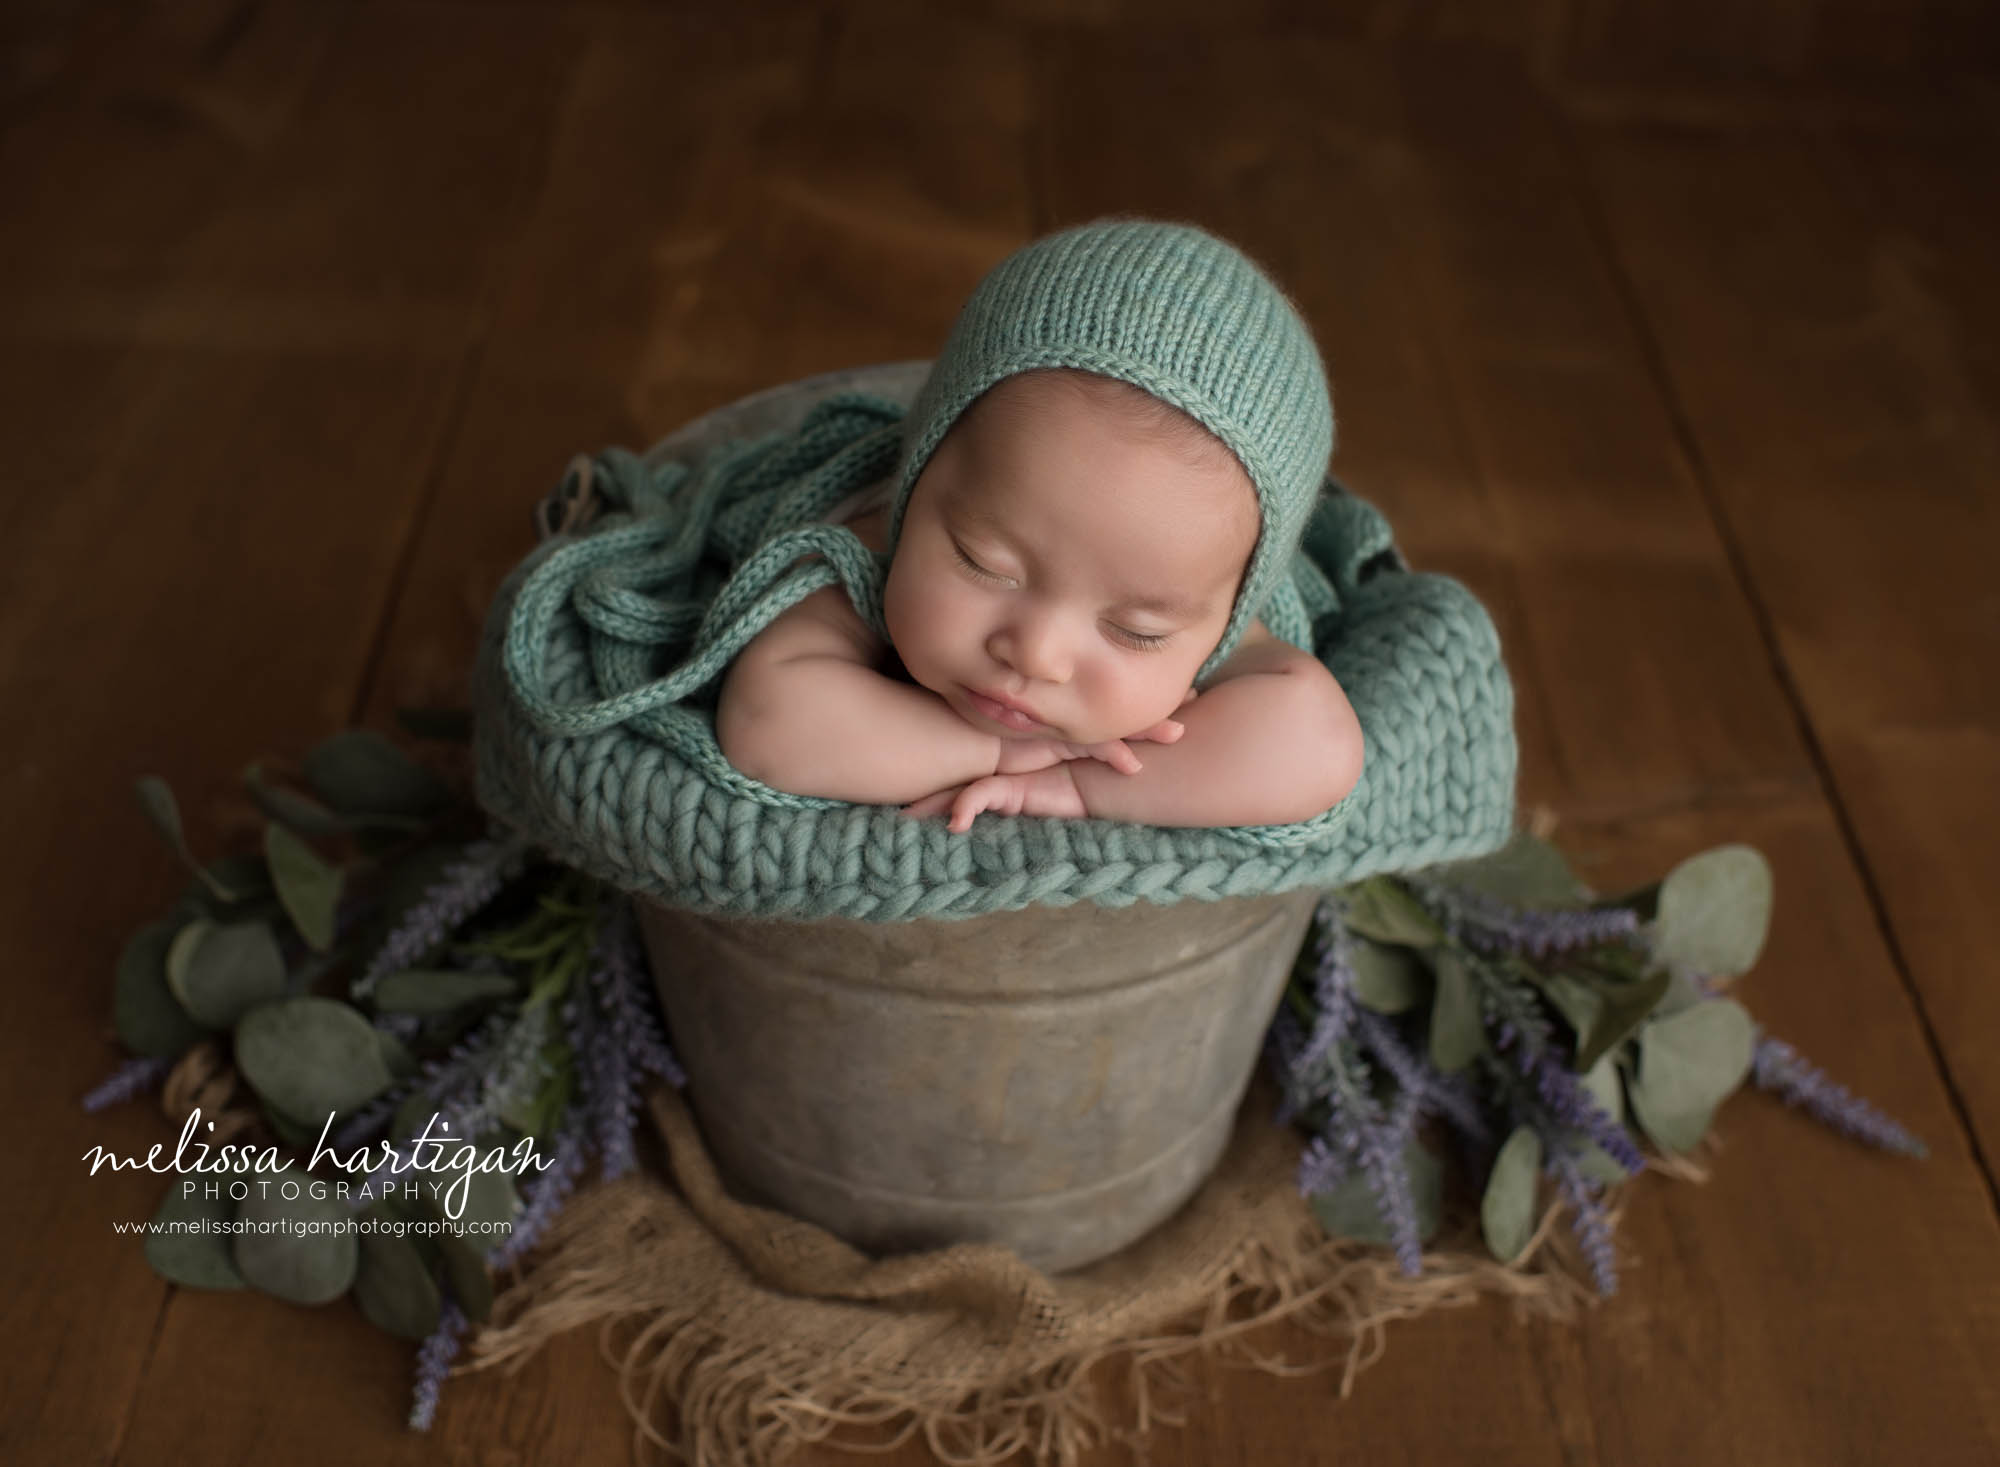 newborn baby girl posed in metal bucket with light colored teal knitted bonnet and wrap